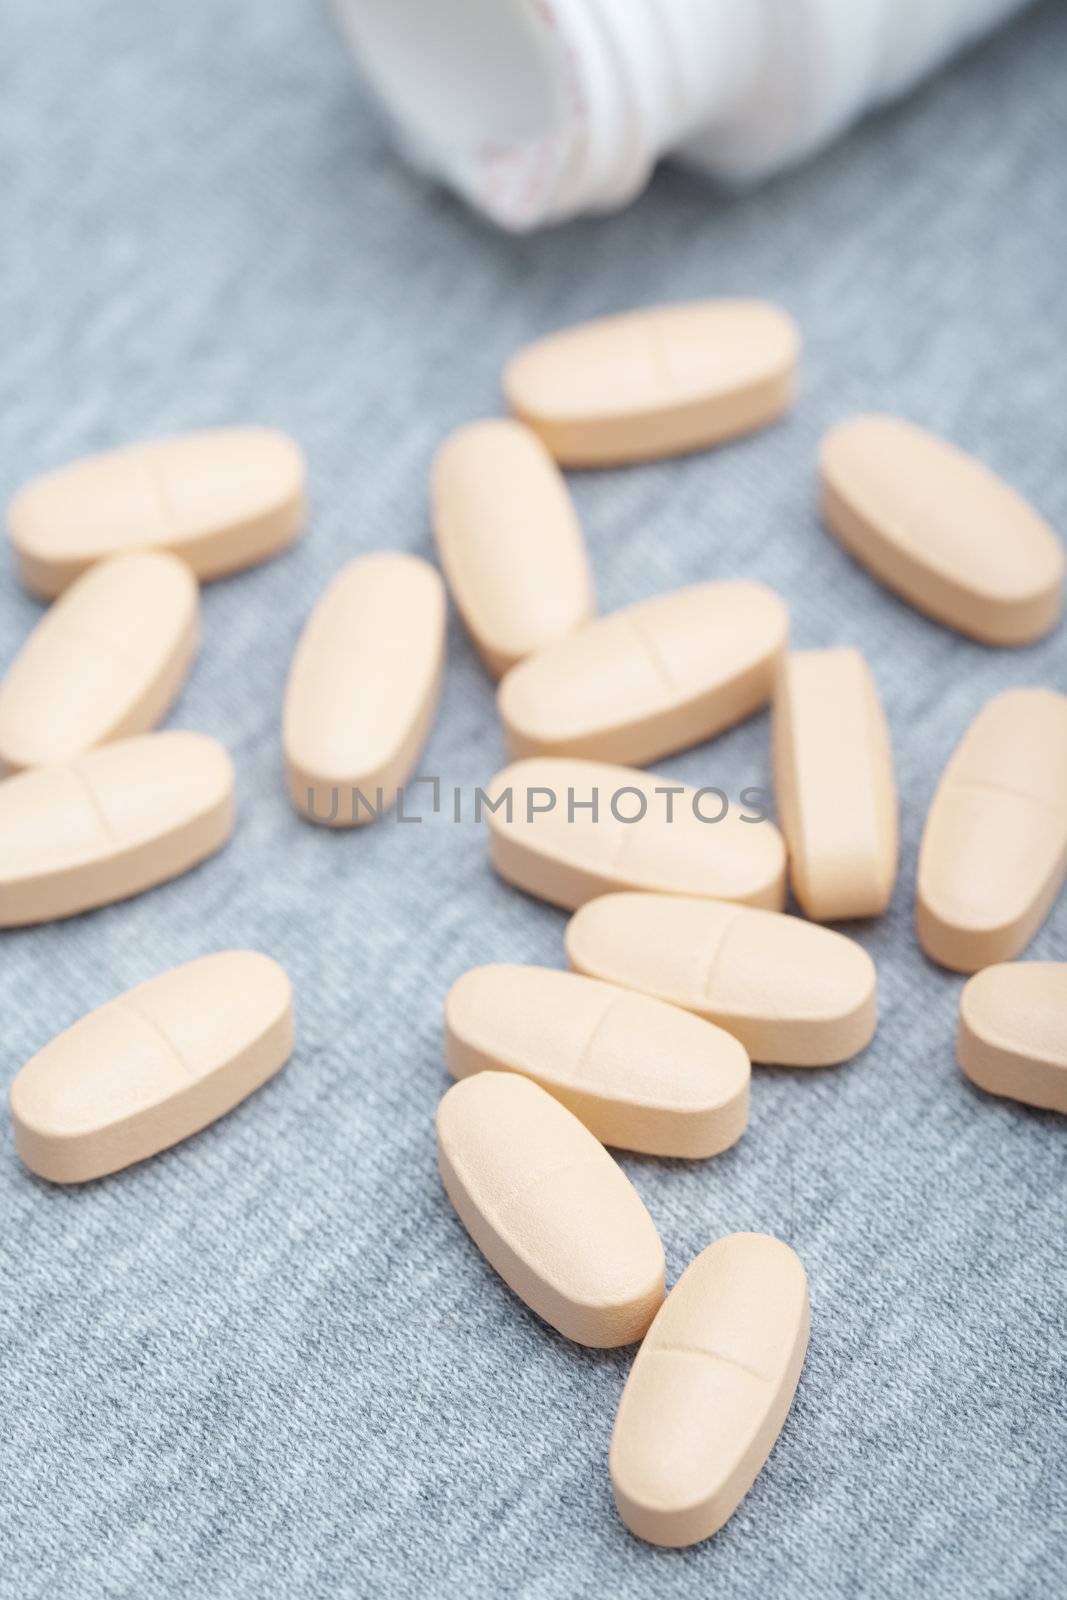 Many pills near white container. Close-up photo